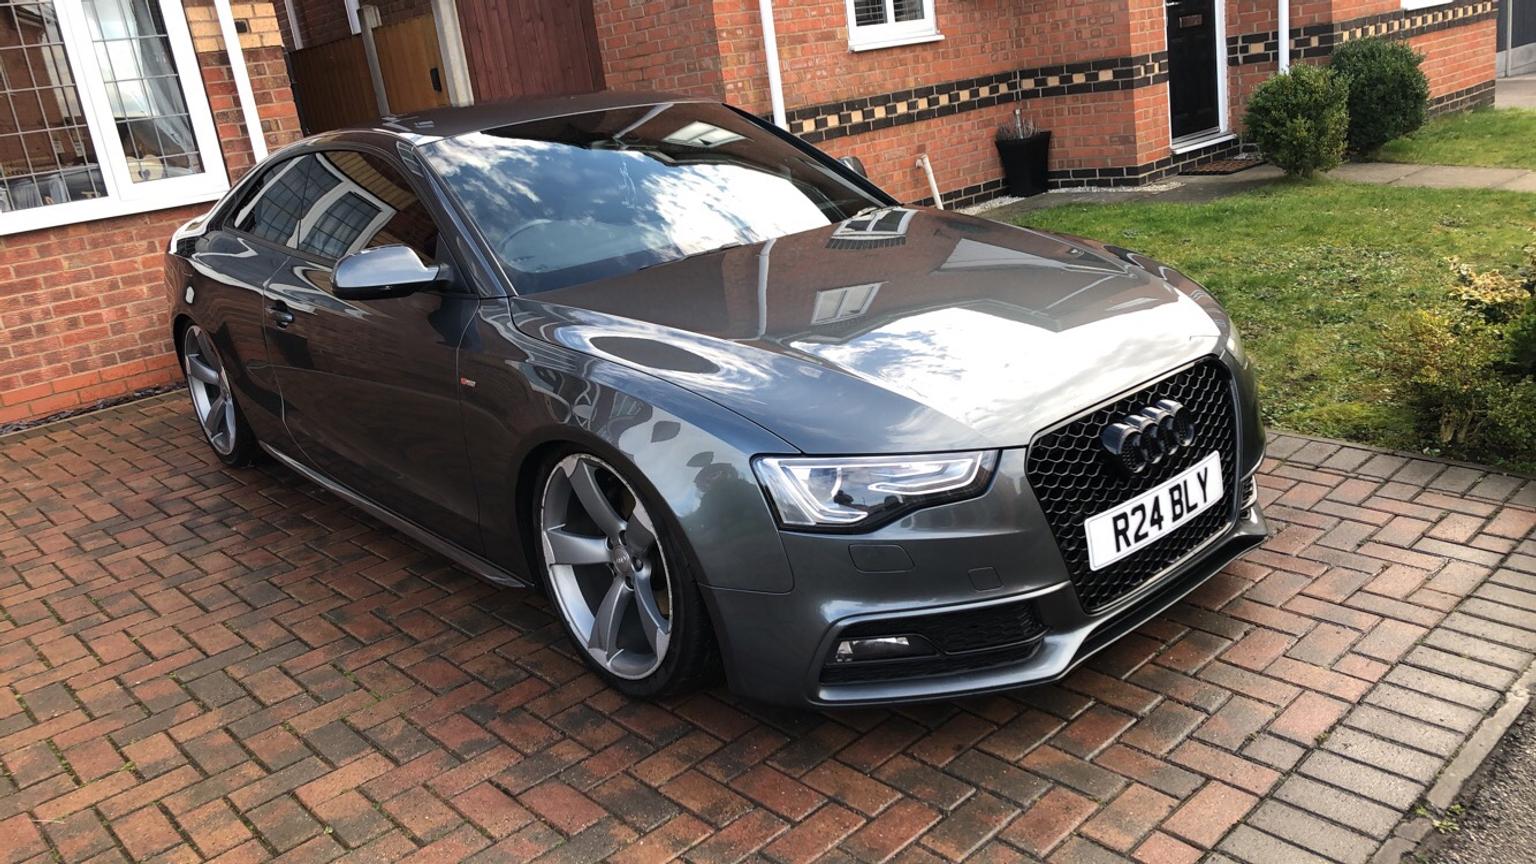 Audi A5 Black Edition S-line 2.0 TDI 2013 in New Brumby for £9,900.00 for sale | Shpock